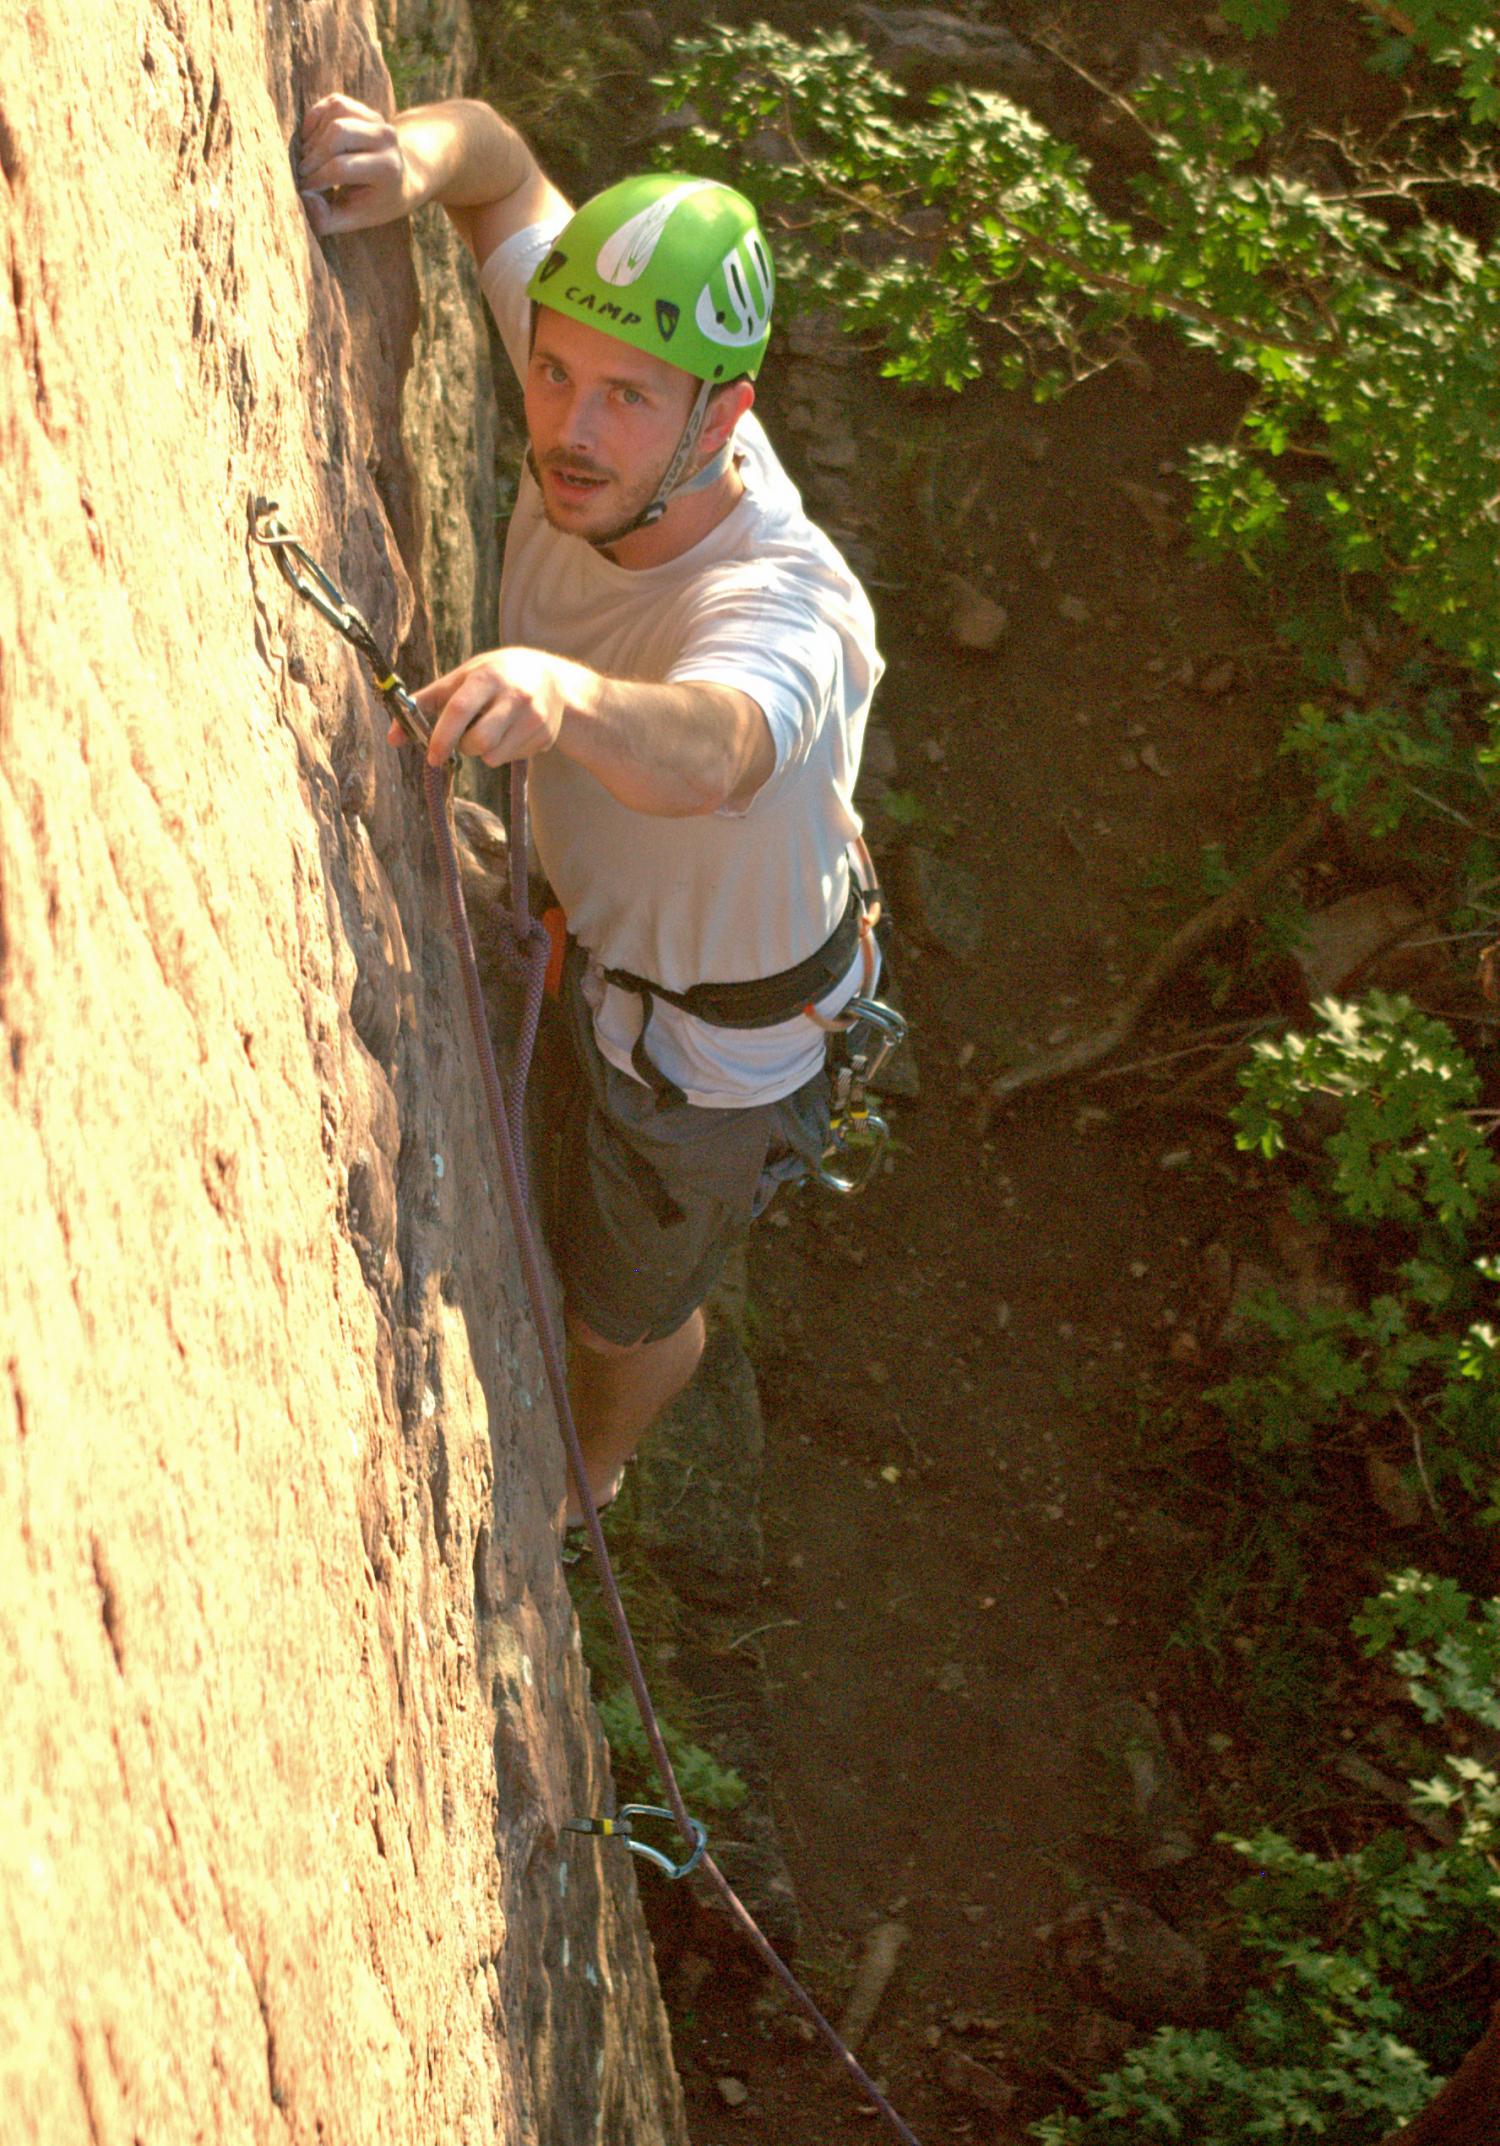 Theoretical Climbing Rope Could Brake Falls